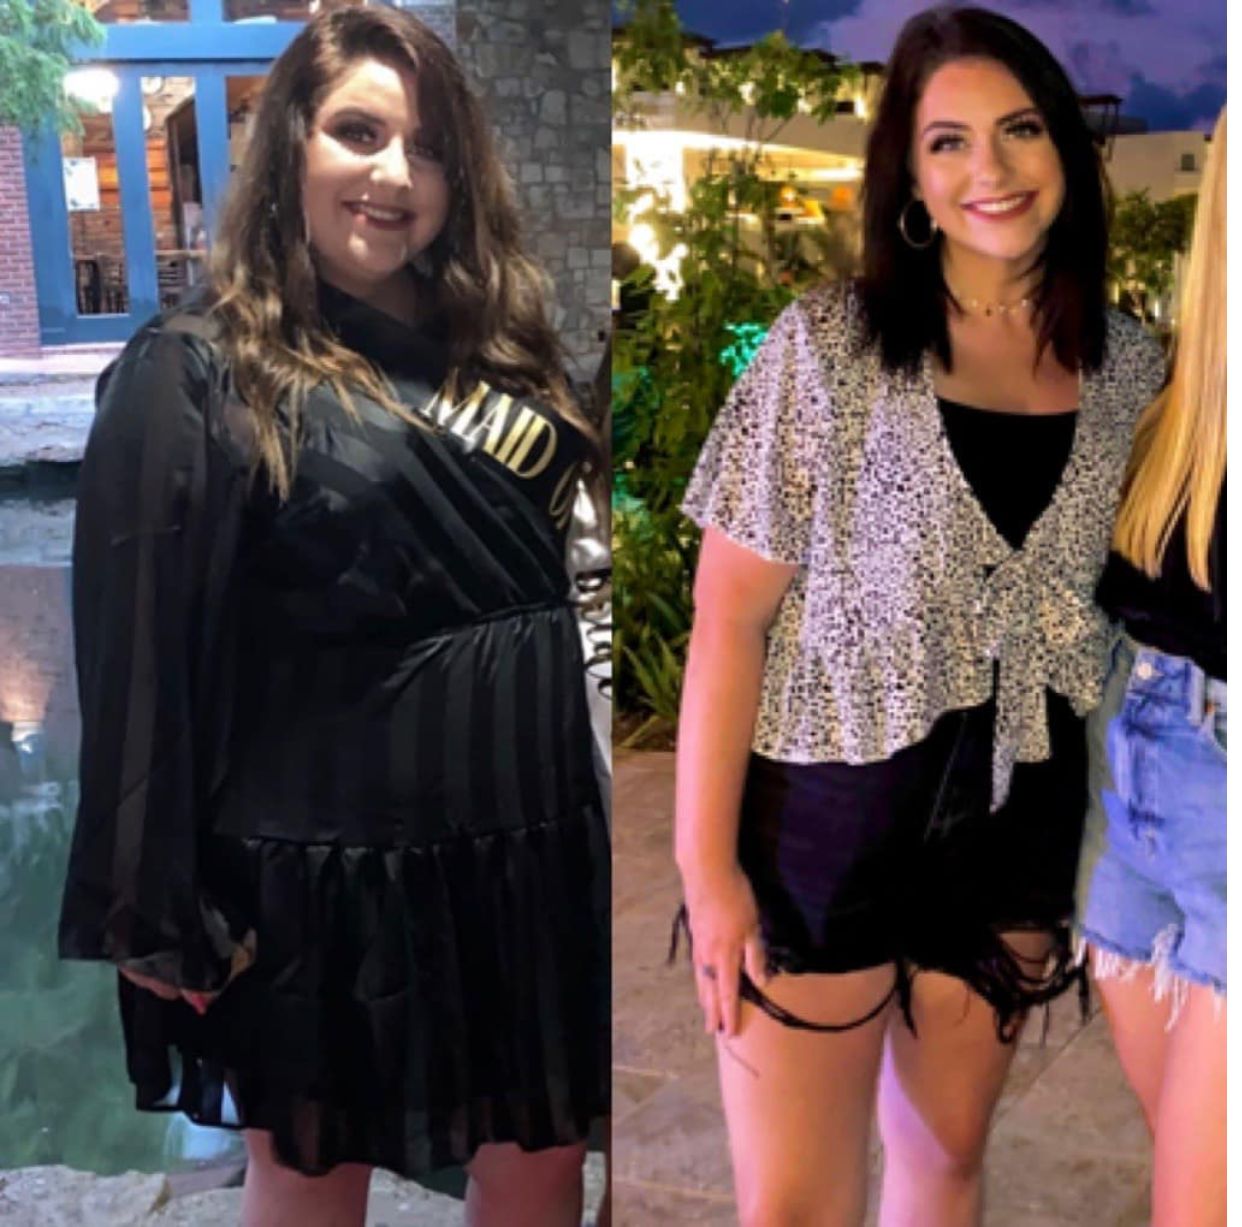 Patients' before and after photos from their bariatric surgery at West Texas Bariatrics.